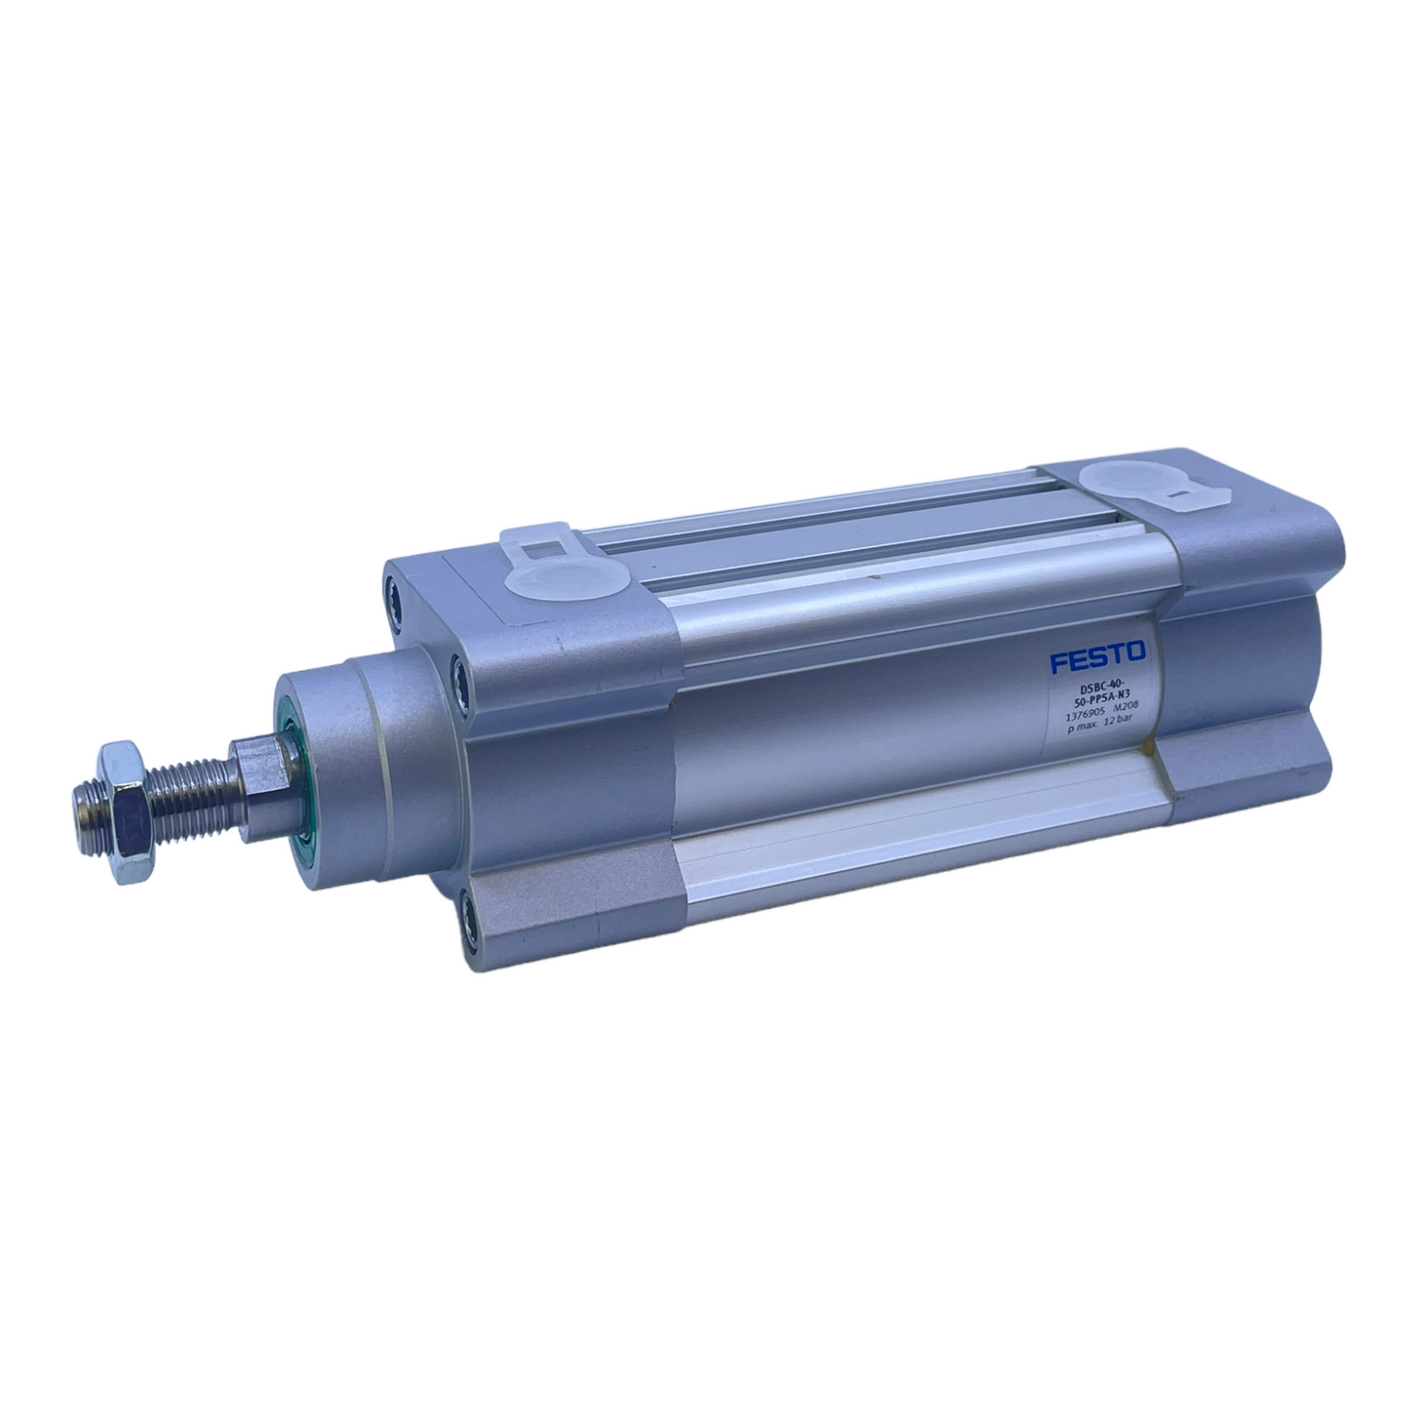 Festo DSBC-40-50-PPSA-N3 standard cylinder 1376905 0.6 to 12bar double-acting